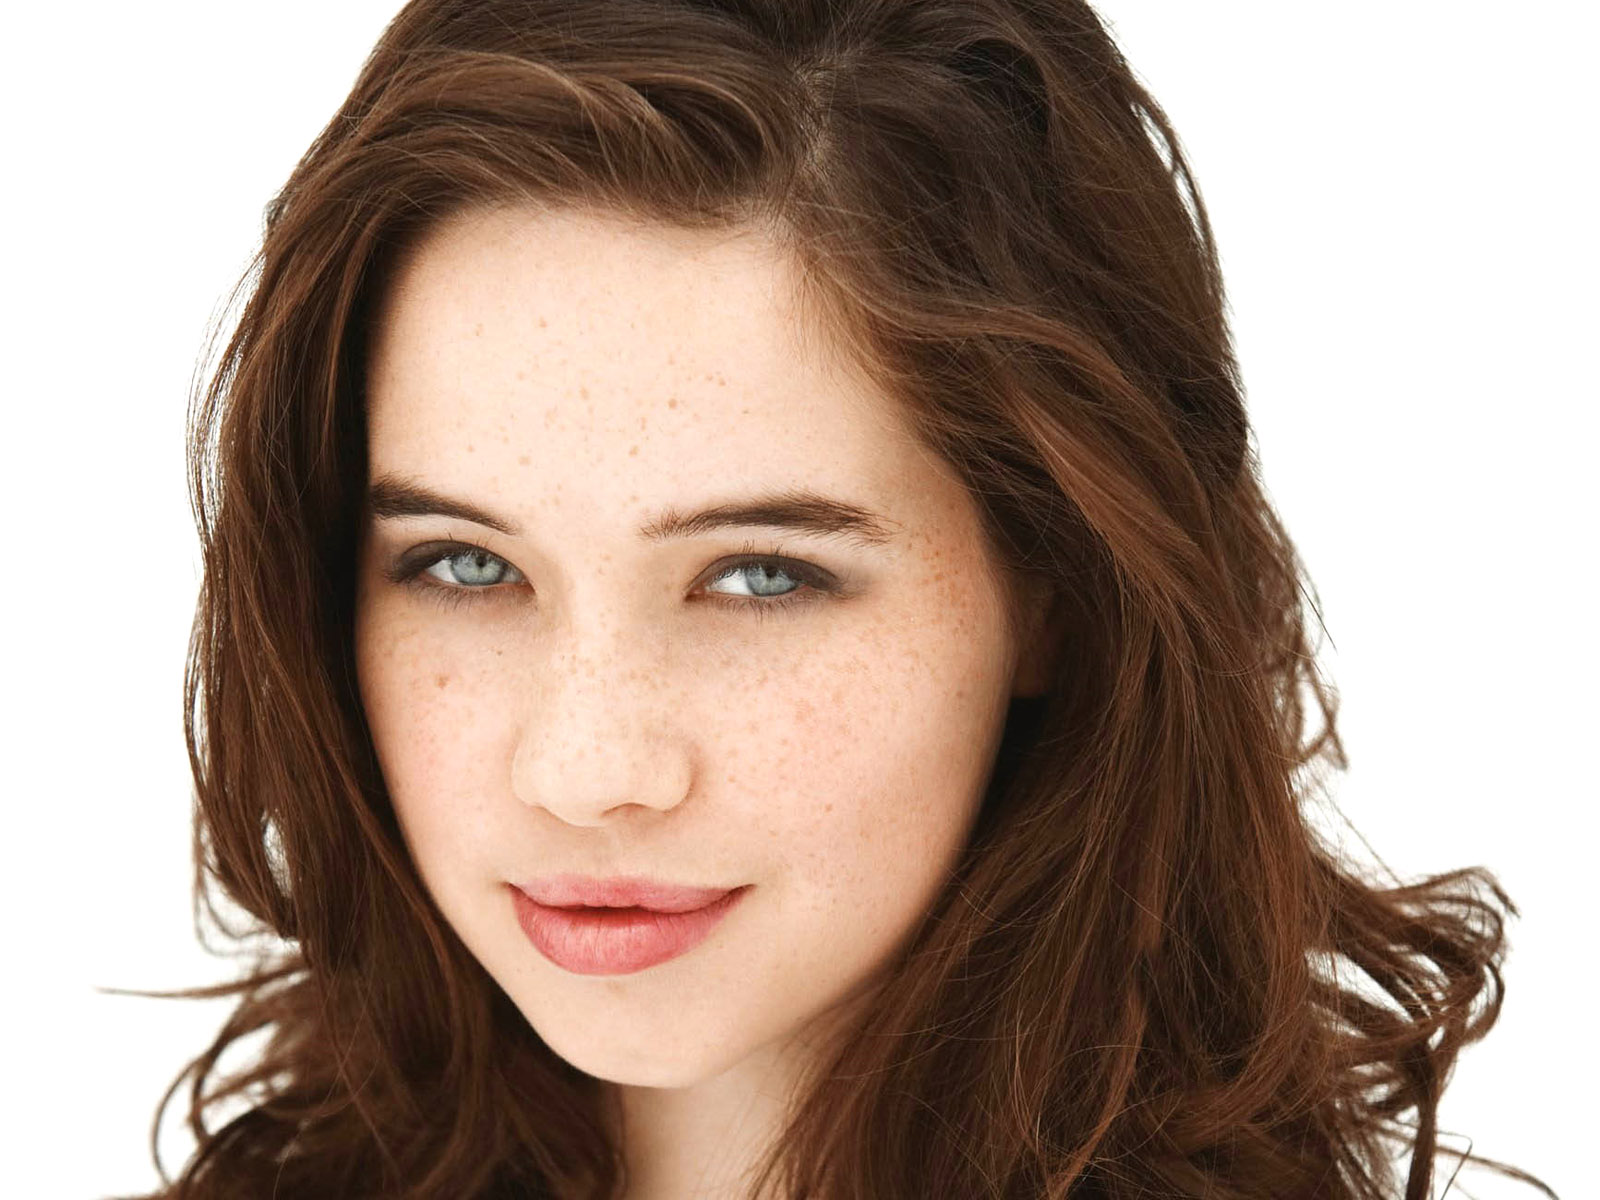 Hollywood: Anna Popplewell Profile, Bio, Photoes And Wallpapers 2011